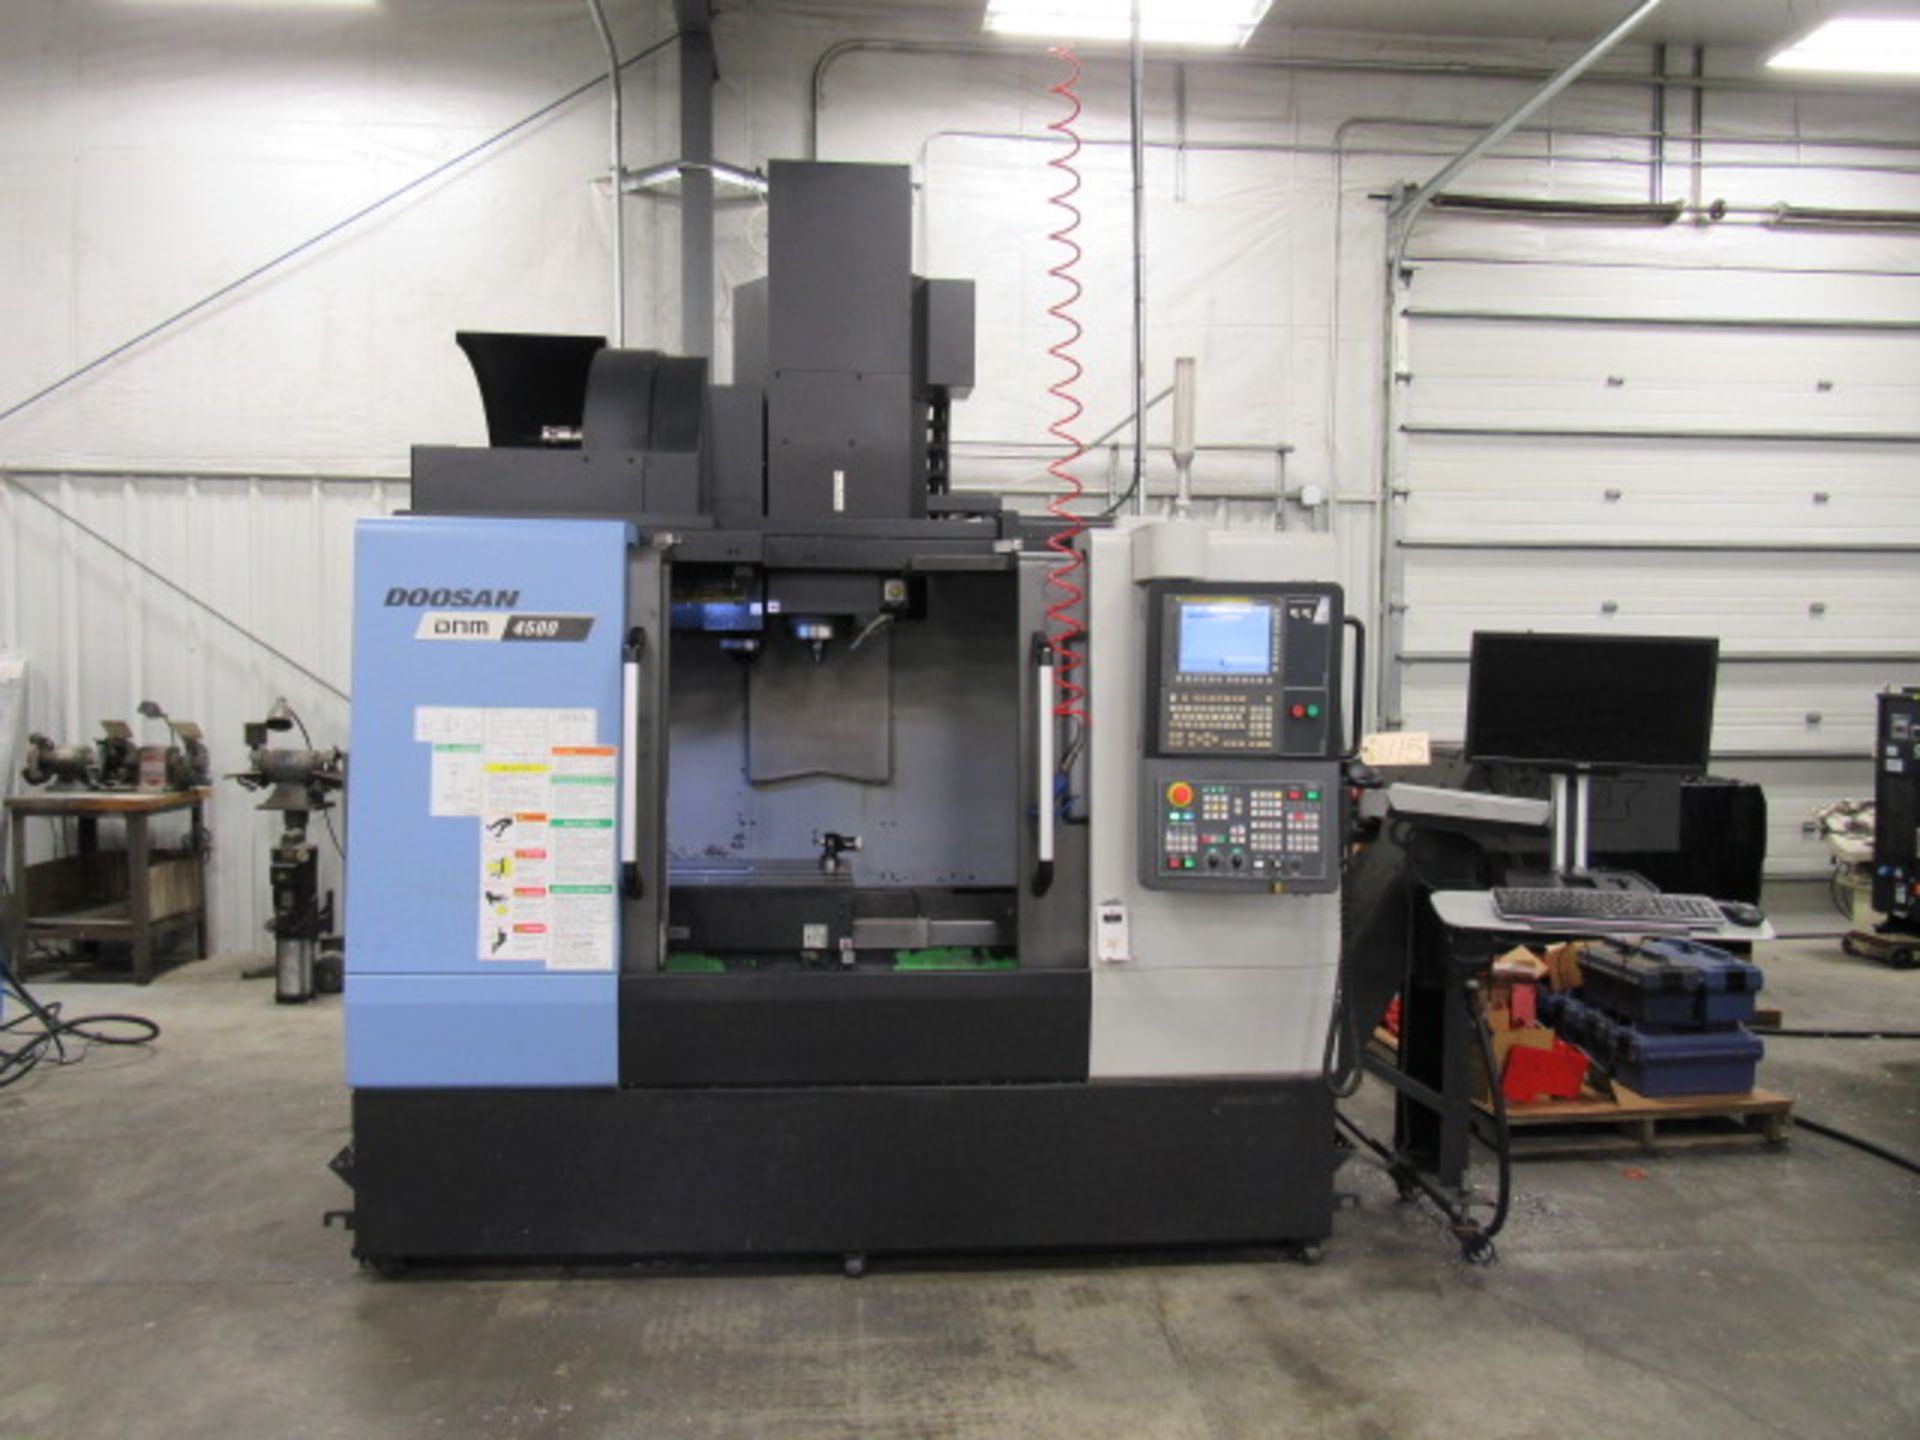 Doosan DNM 4500 CNC Vertical Machining Center with 39.4'' x 17.7'' Tables, Big Plus #40, Spindle - Image 9 of 9